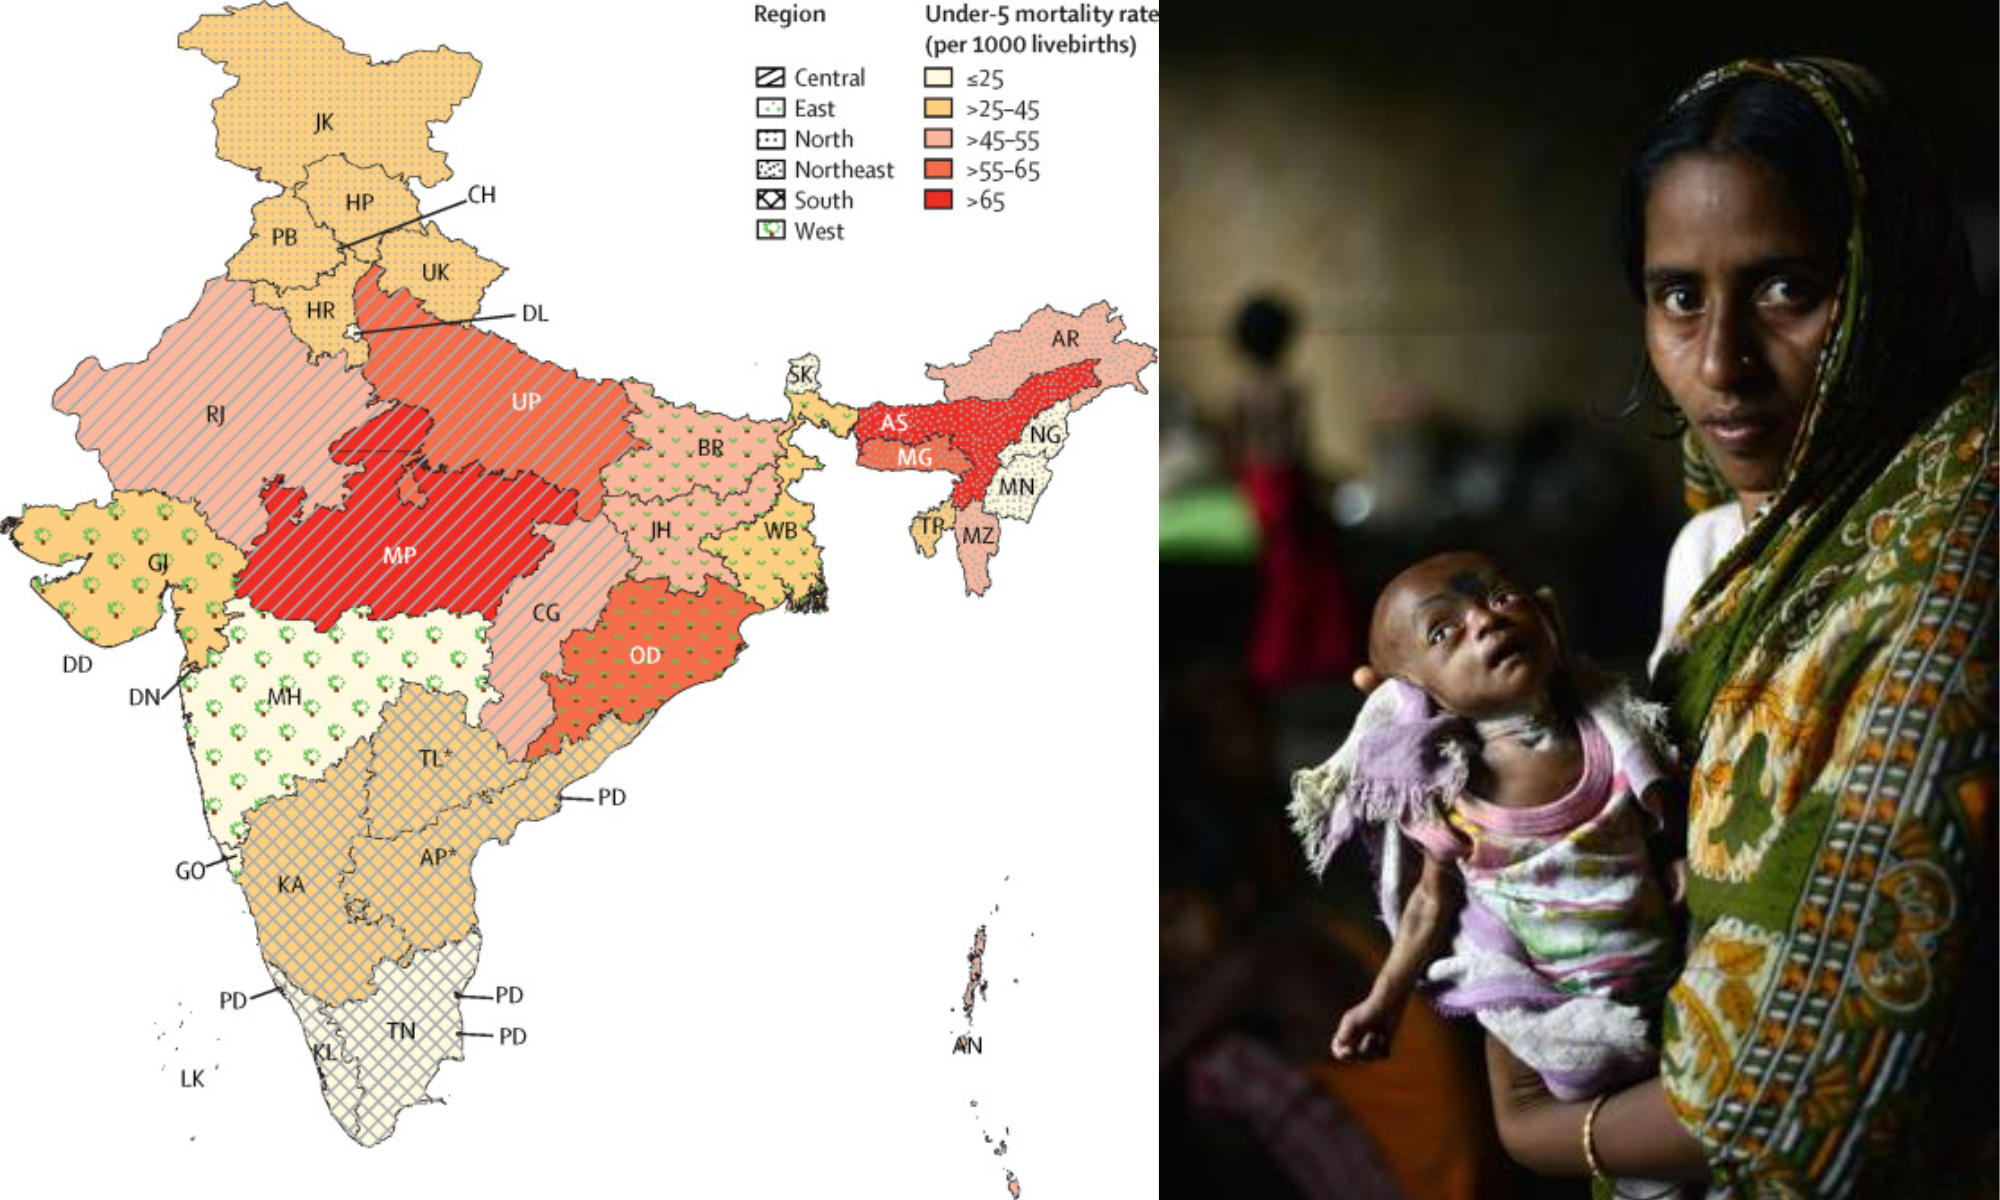 India's under-5 mortality rate declines by 3 points; largest drops in UP and Karnataka